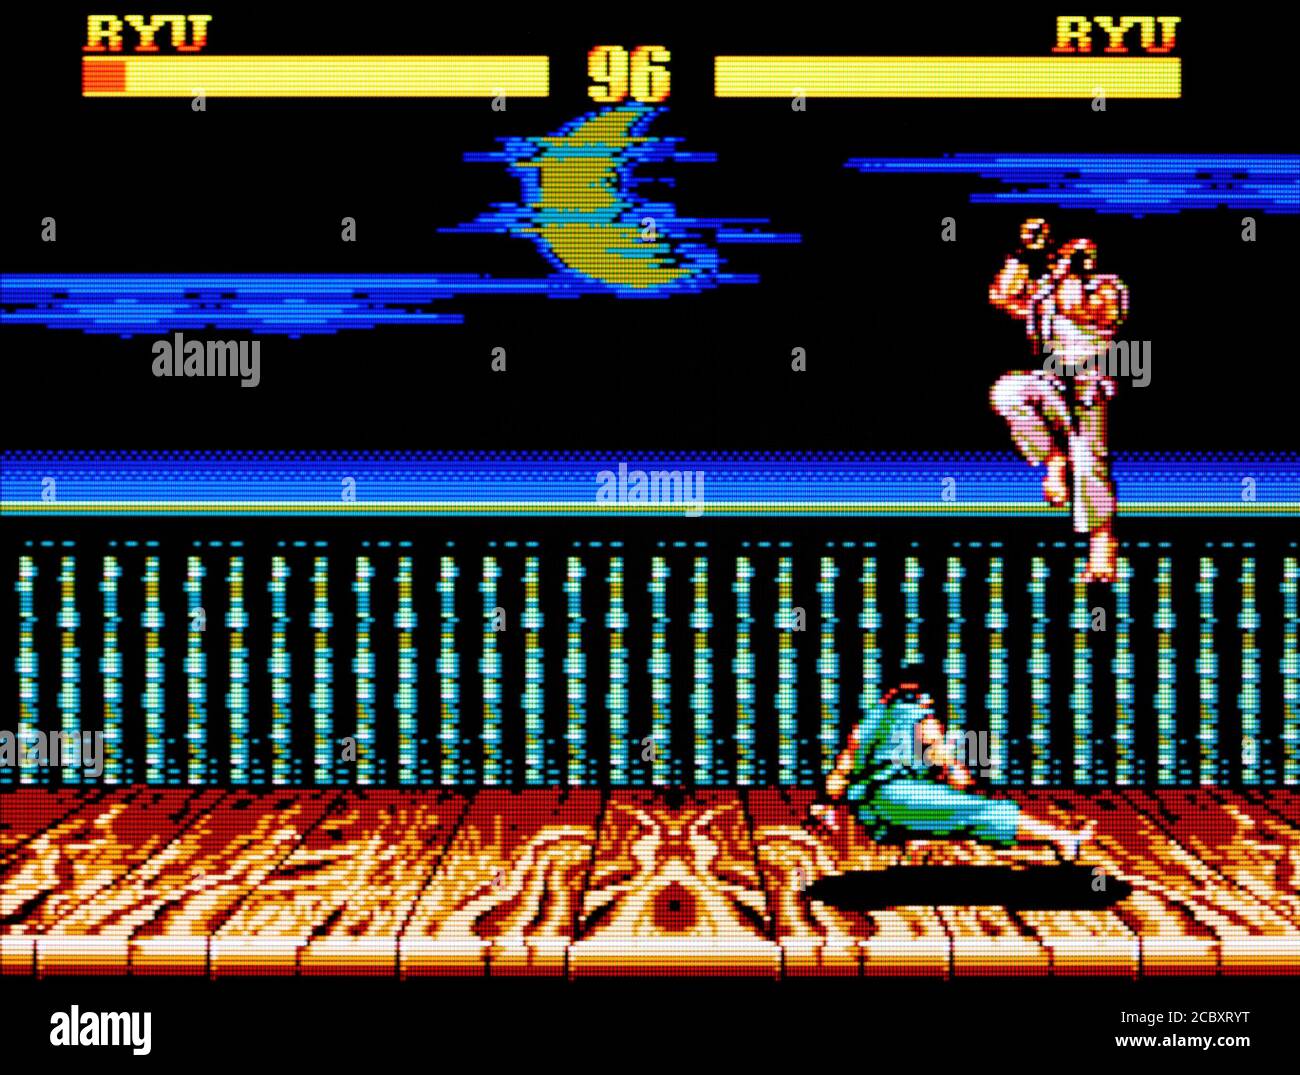 Street Fighter 1 on NES 2 out of 2 image gallery